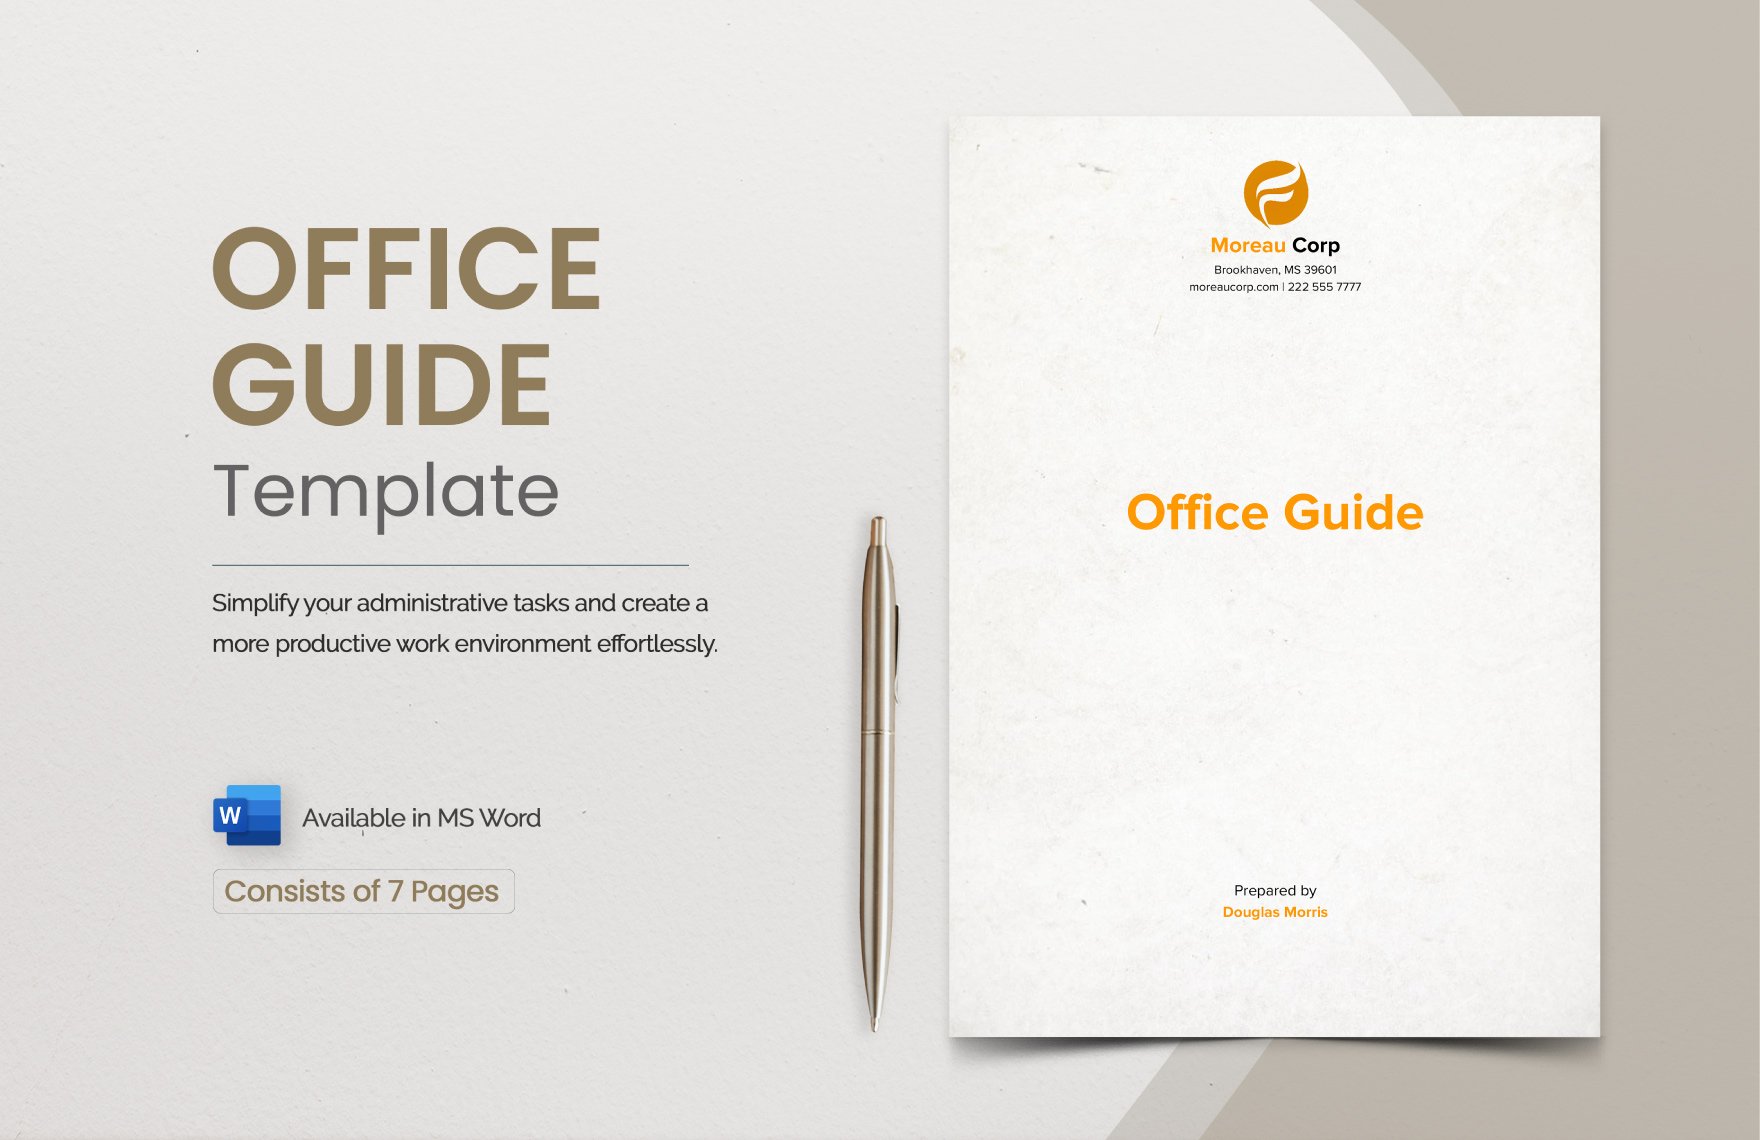 Free Office Guide Template in Word